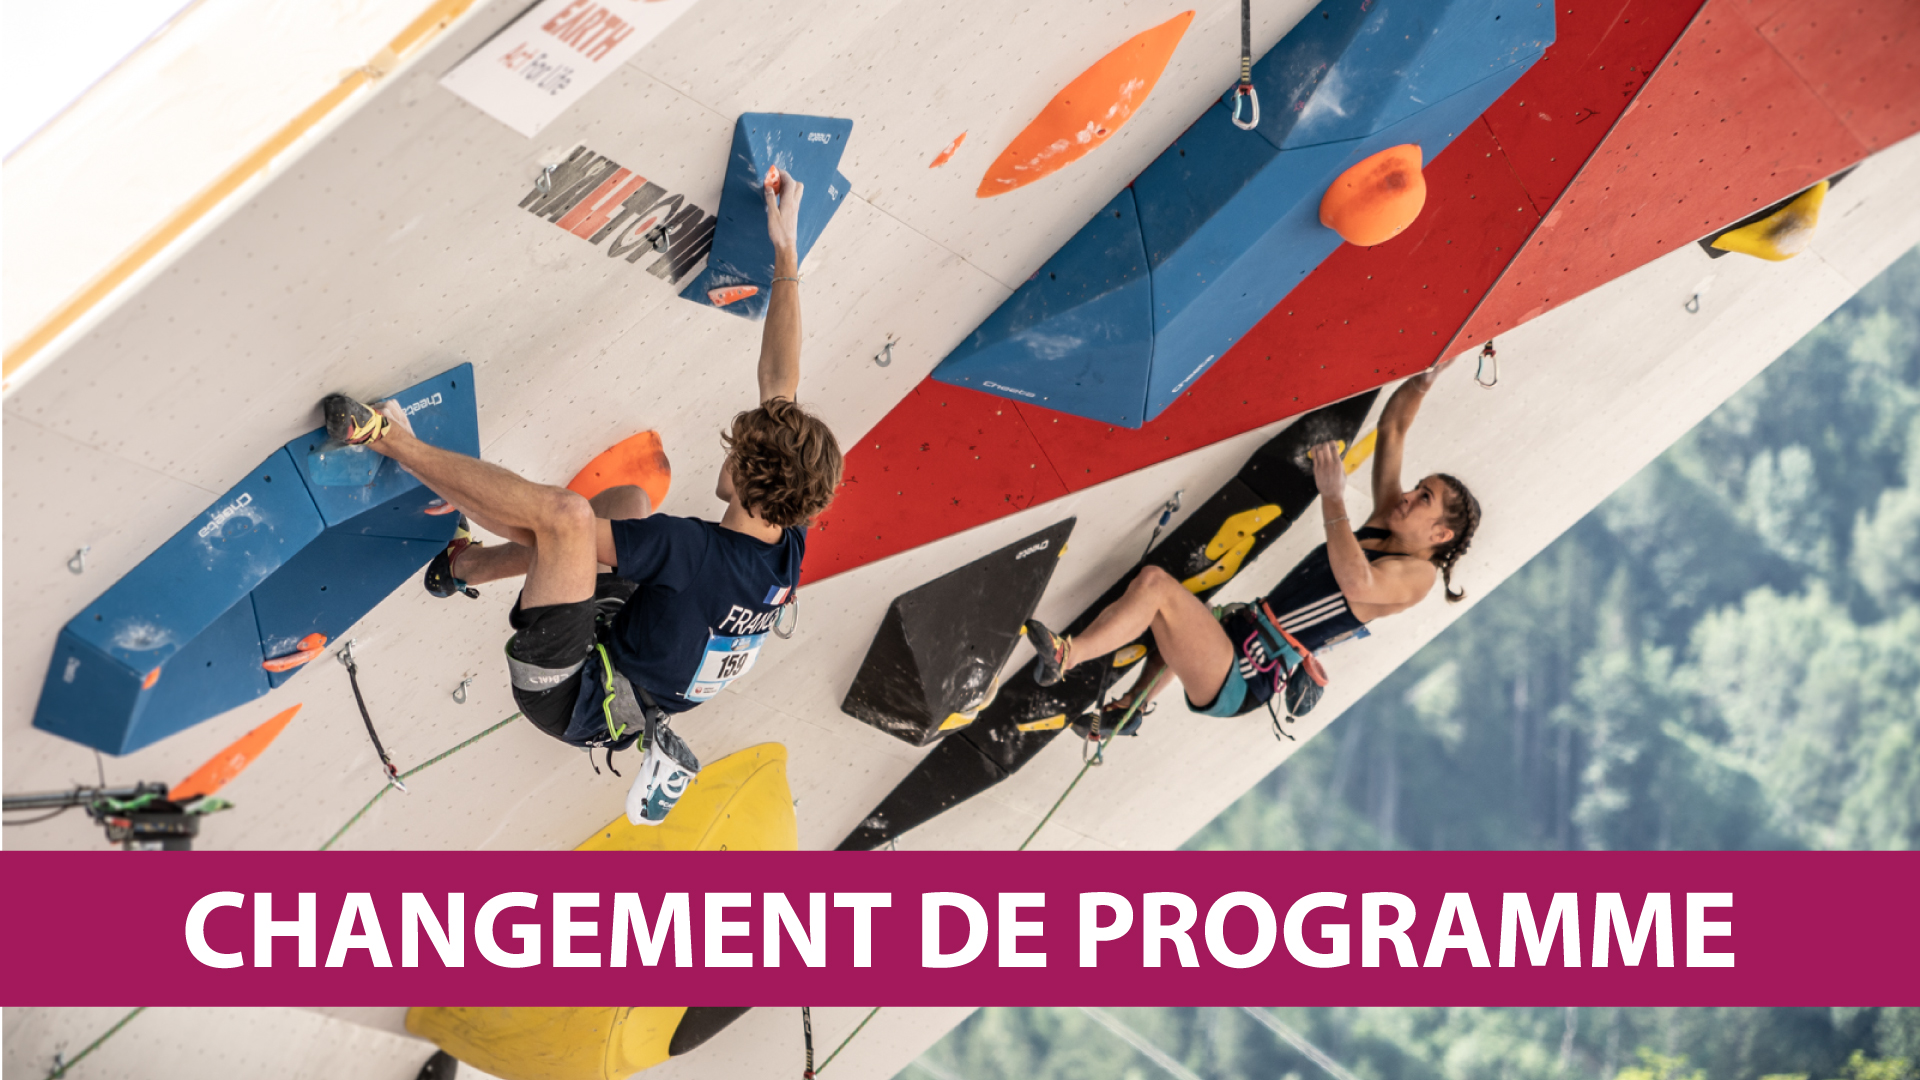 Change of programme - Climbing World Cup